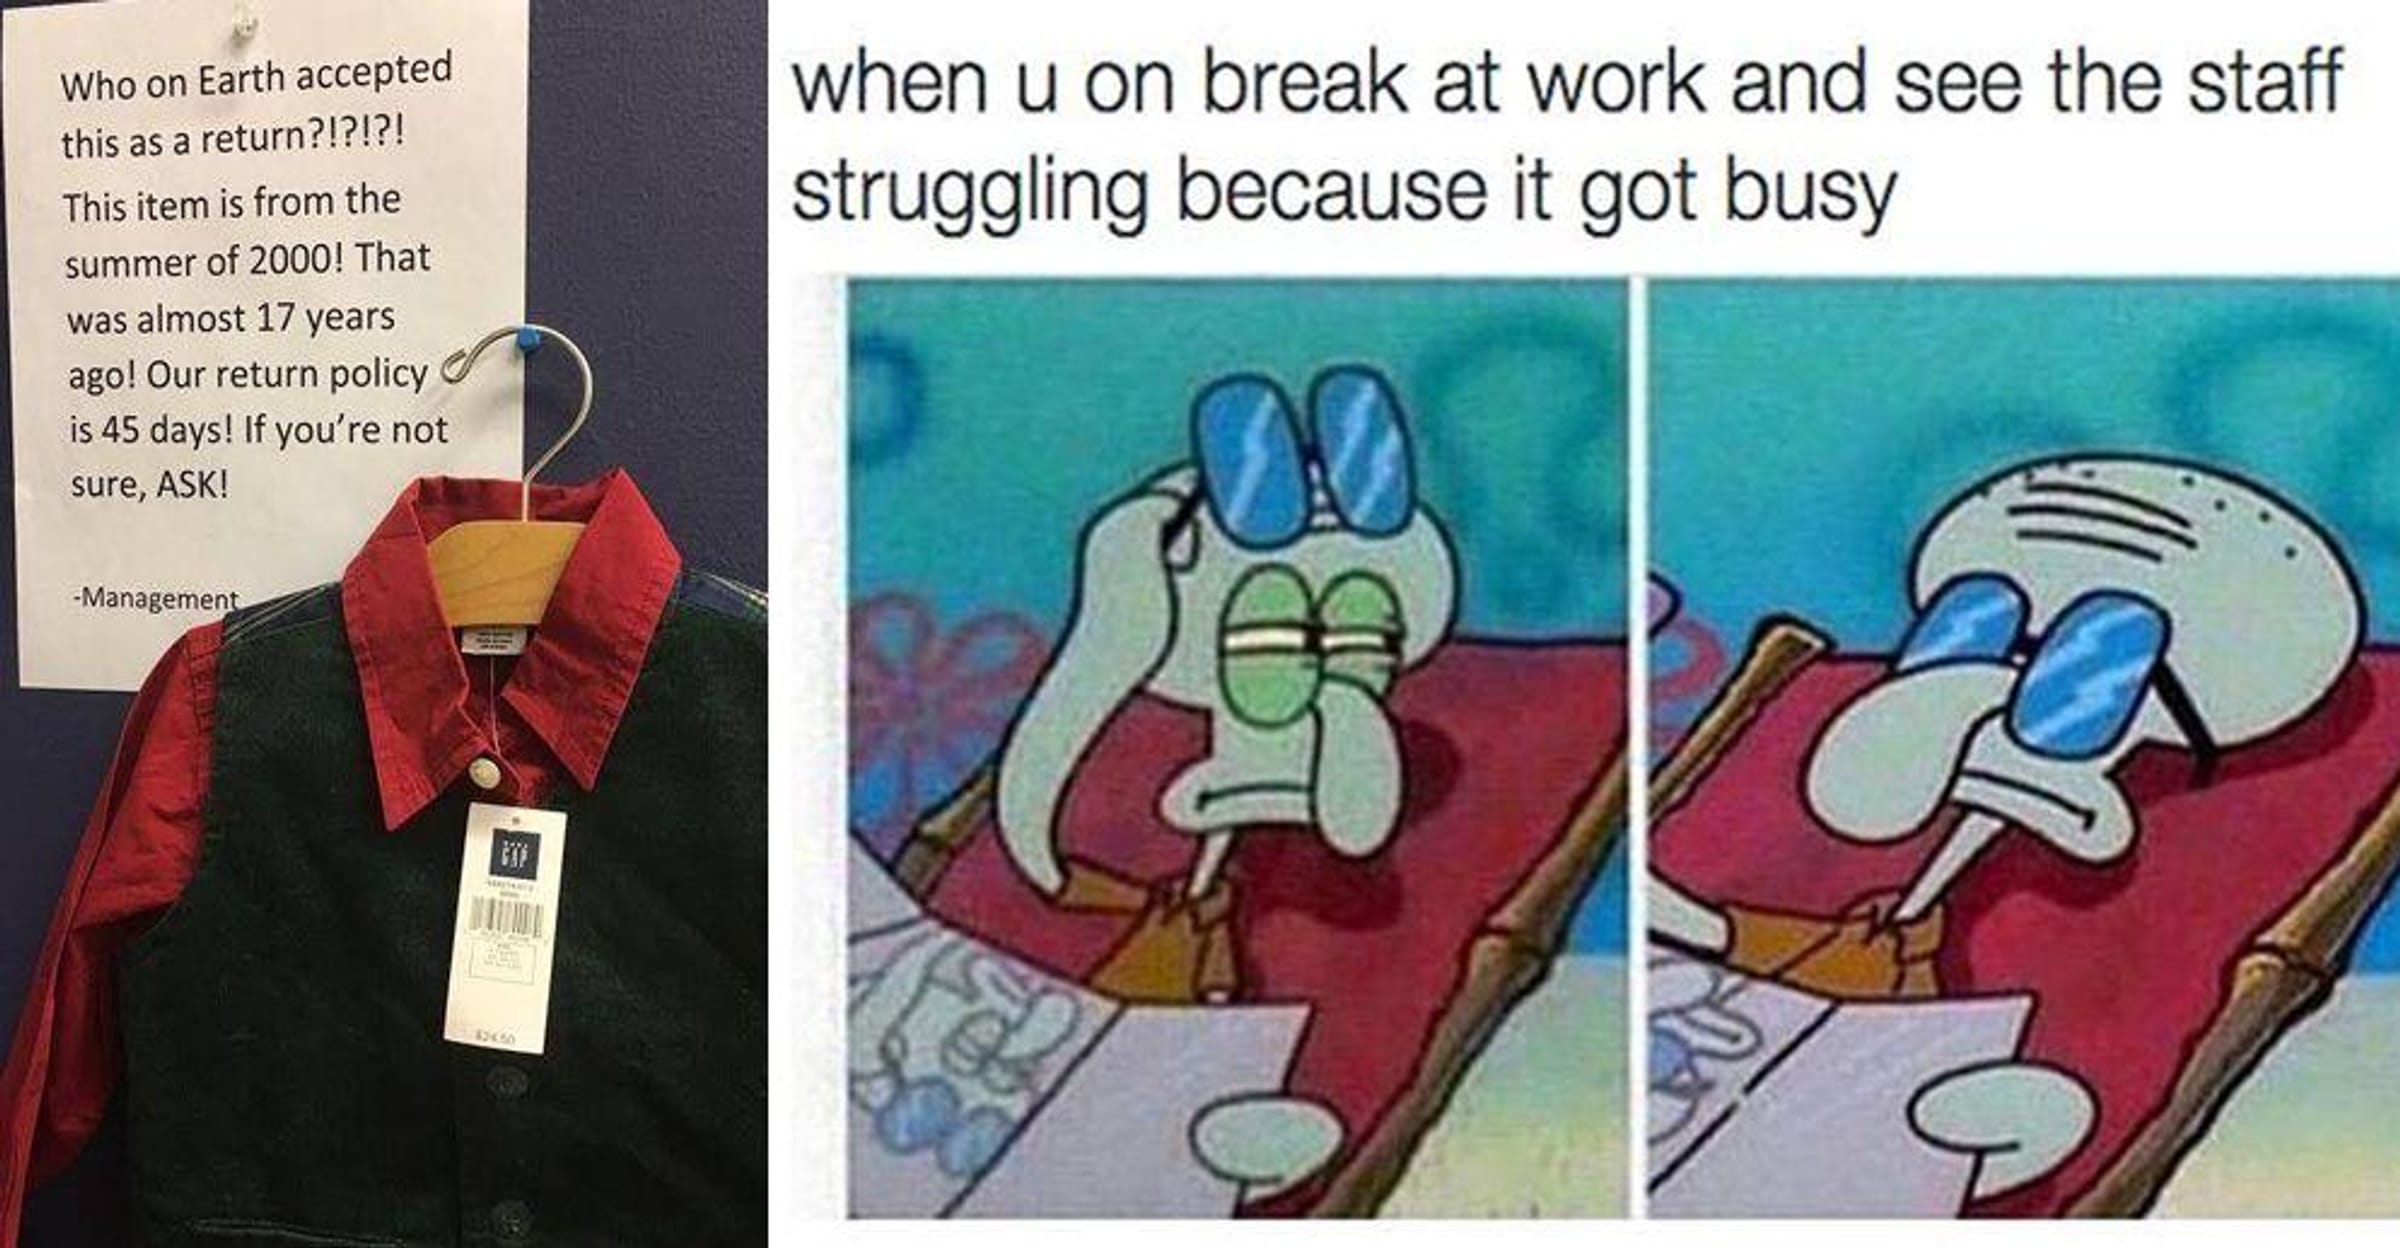 27 Funny Memes About Being Bored at Work or Home